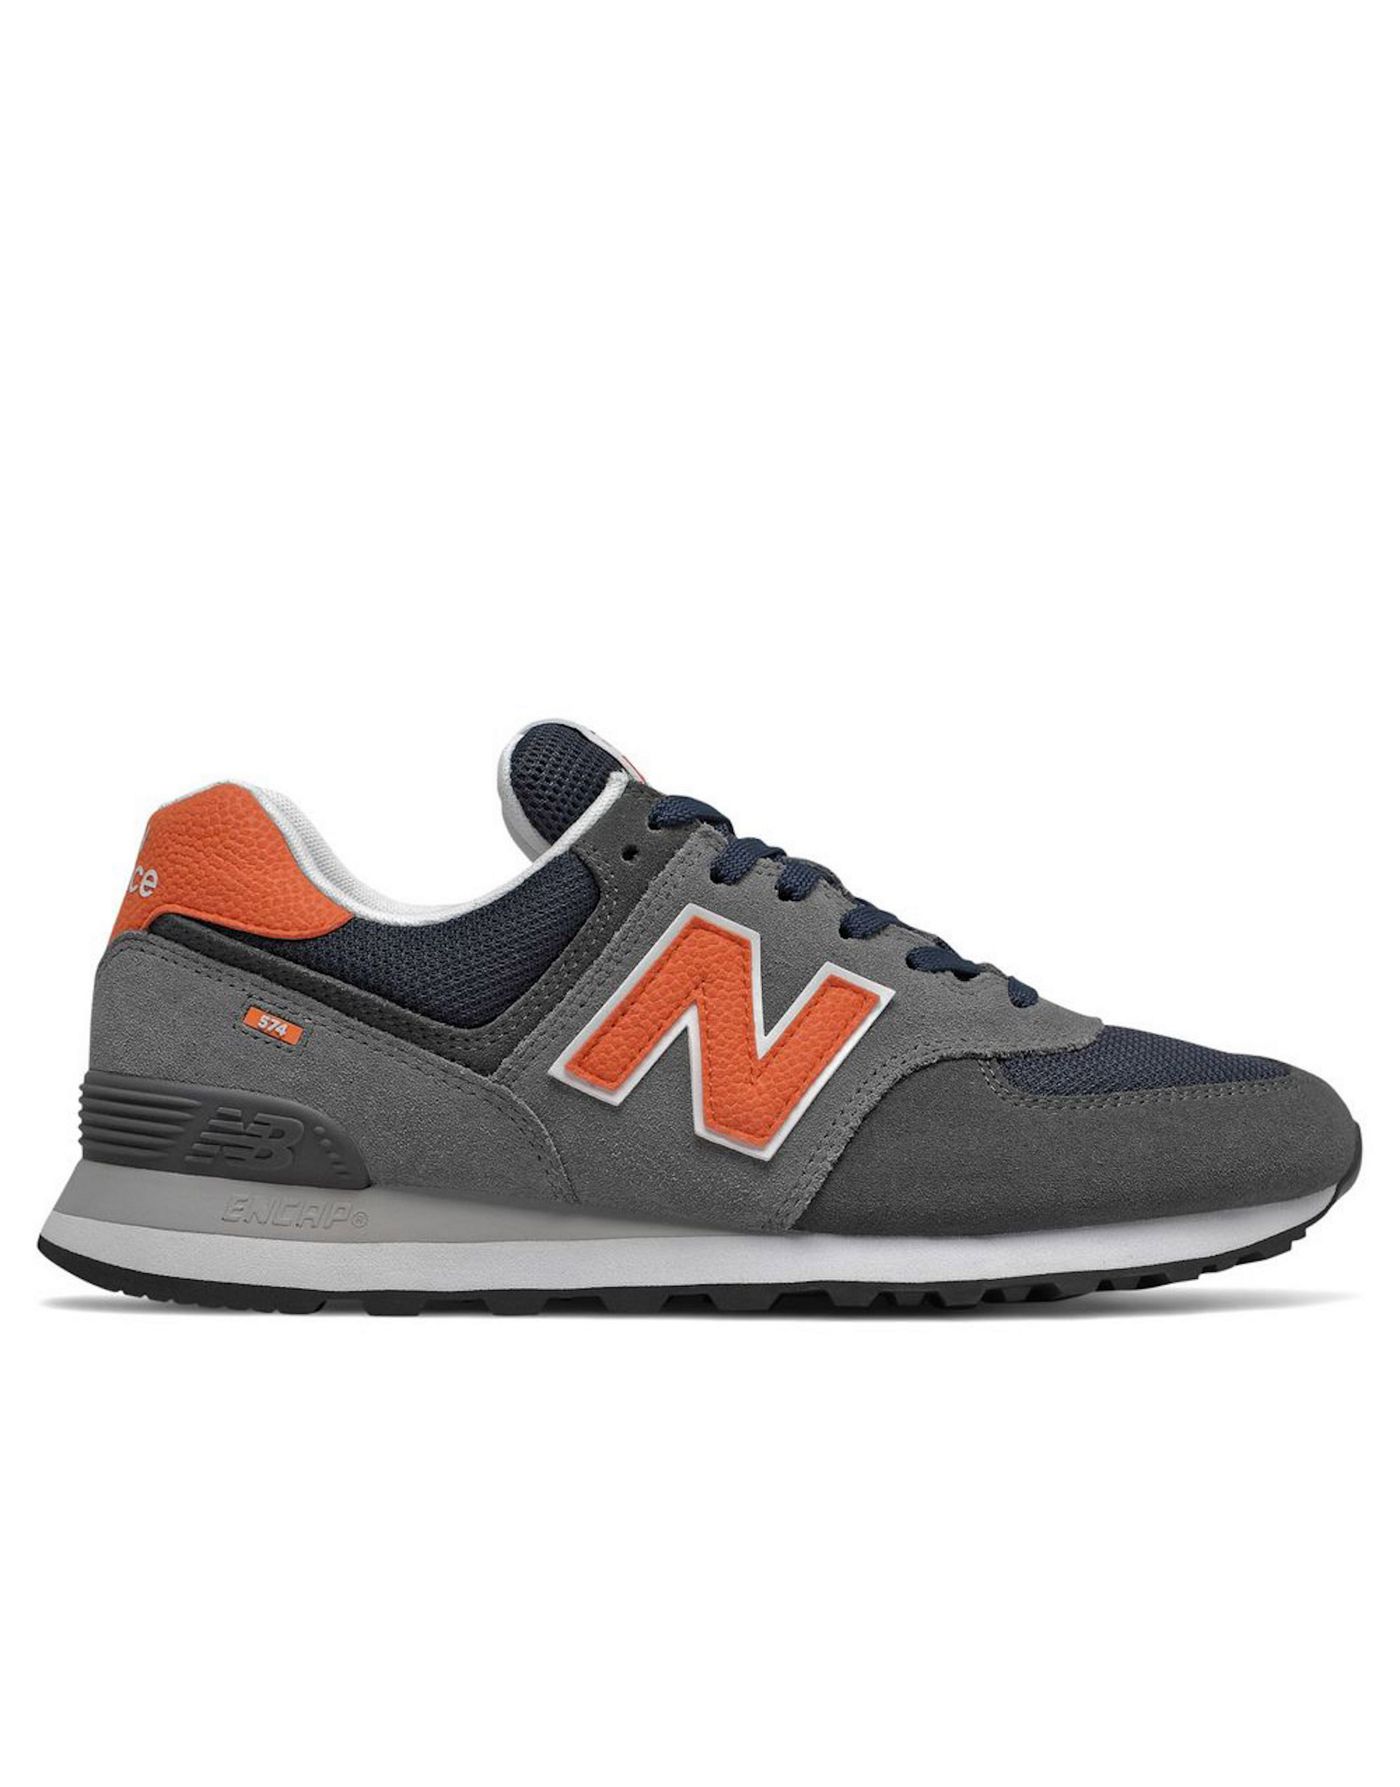 New Balance 574 trainers in grey